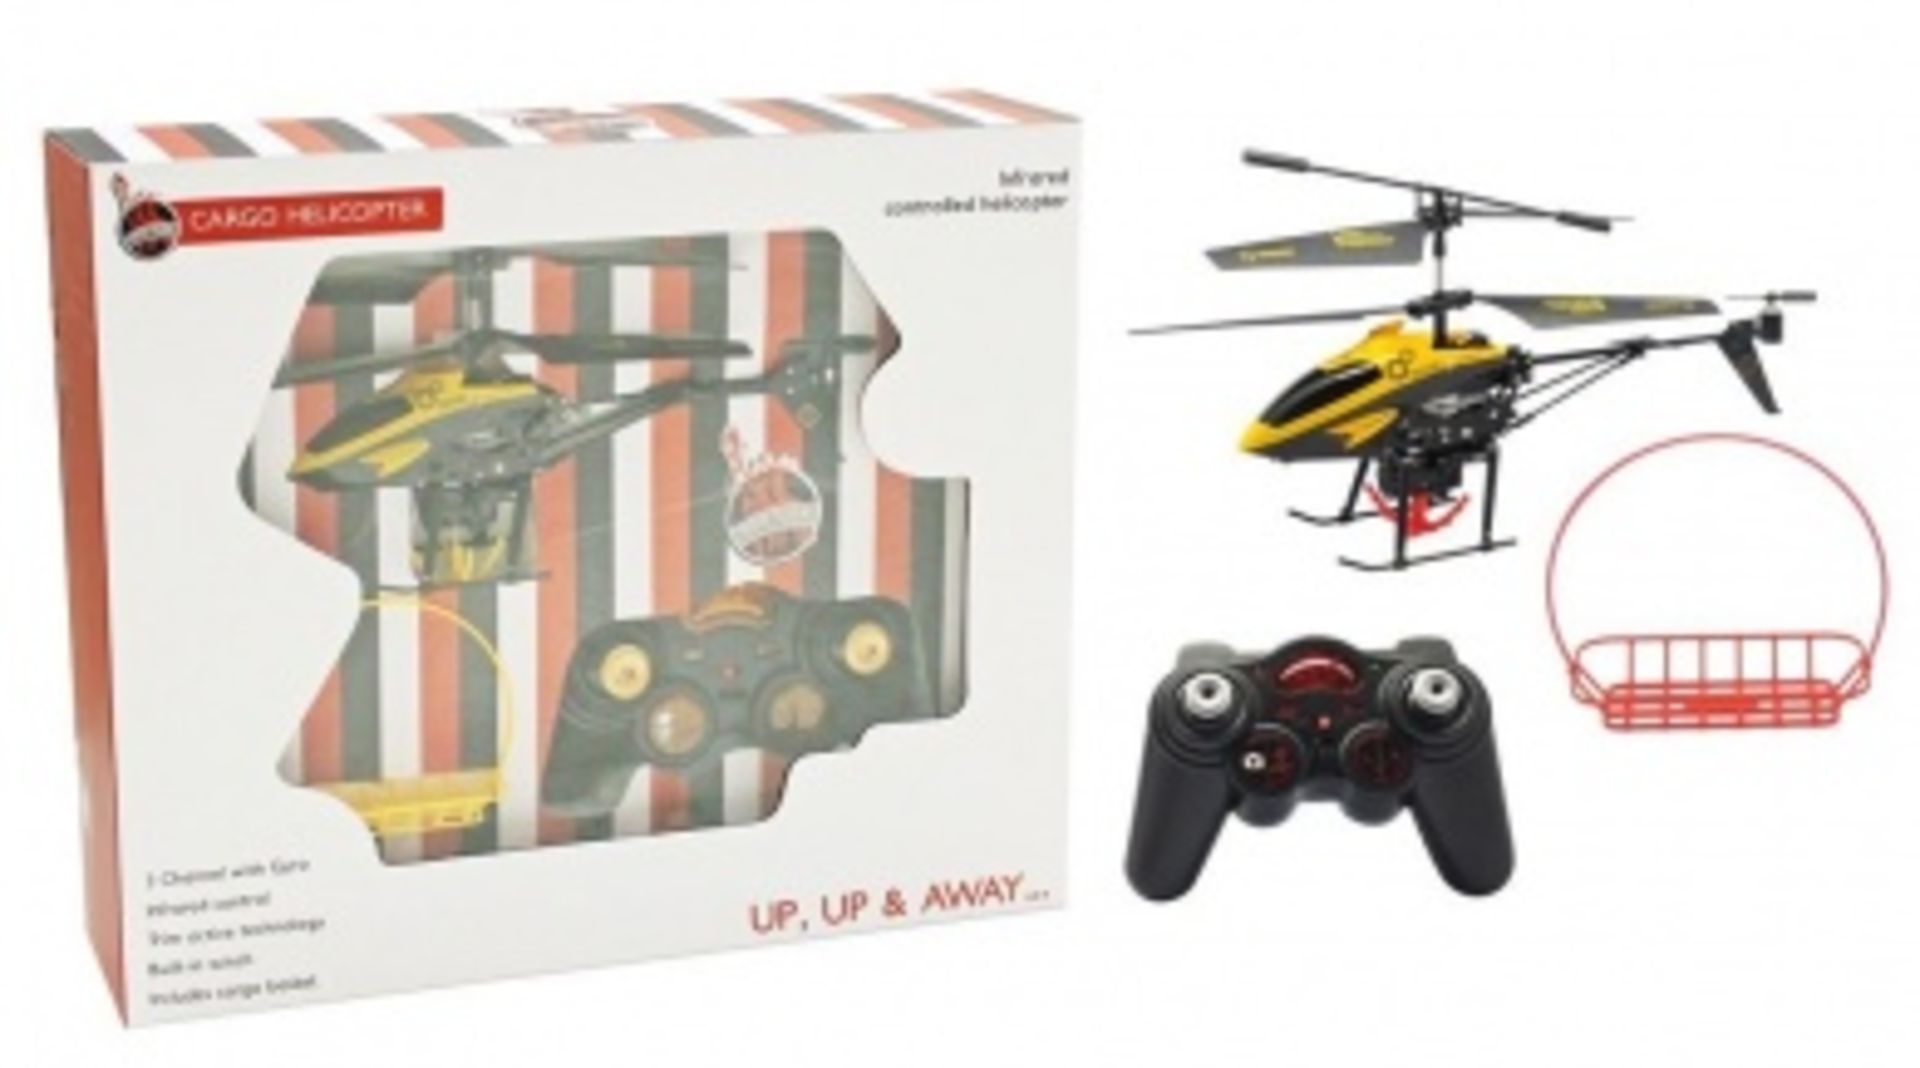 V *TRADE QTY* Brand New Infrared Controlled Cargo Helicopter With 3 Channel Gyro & Trim Active